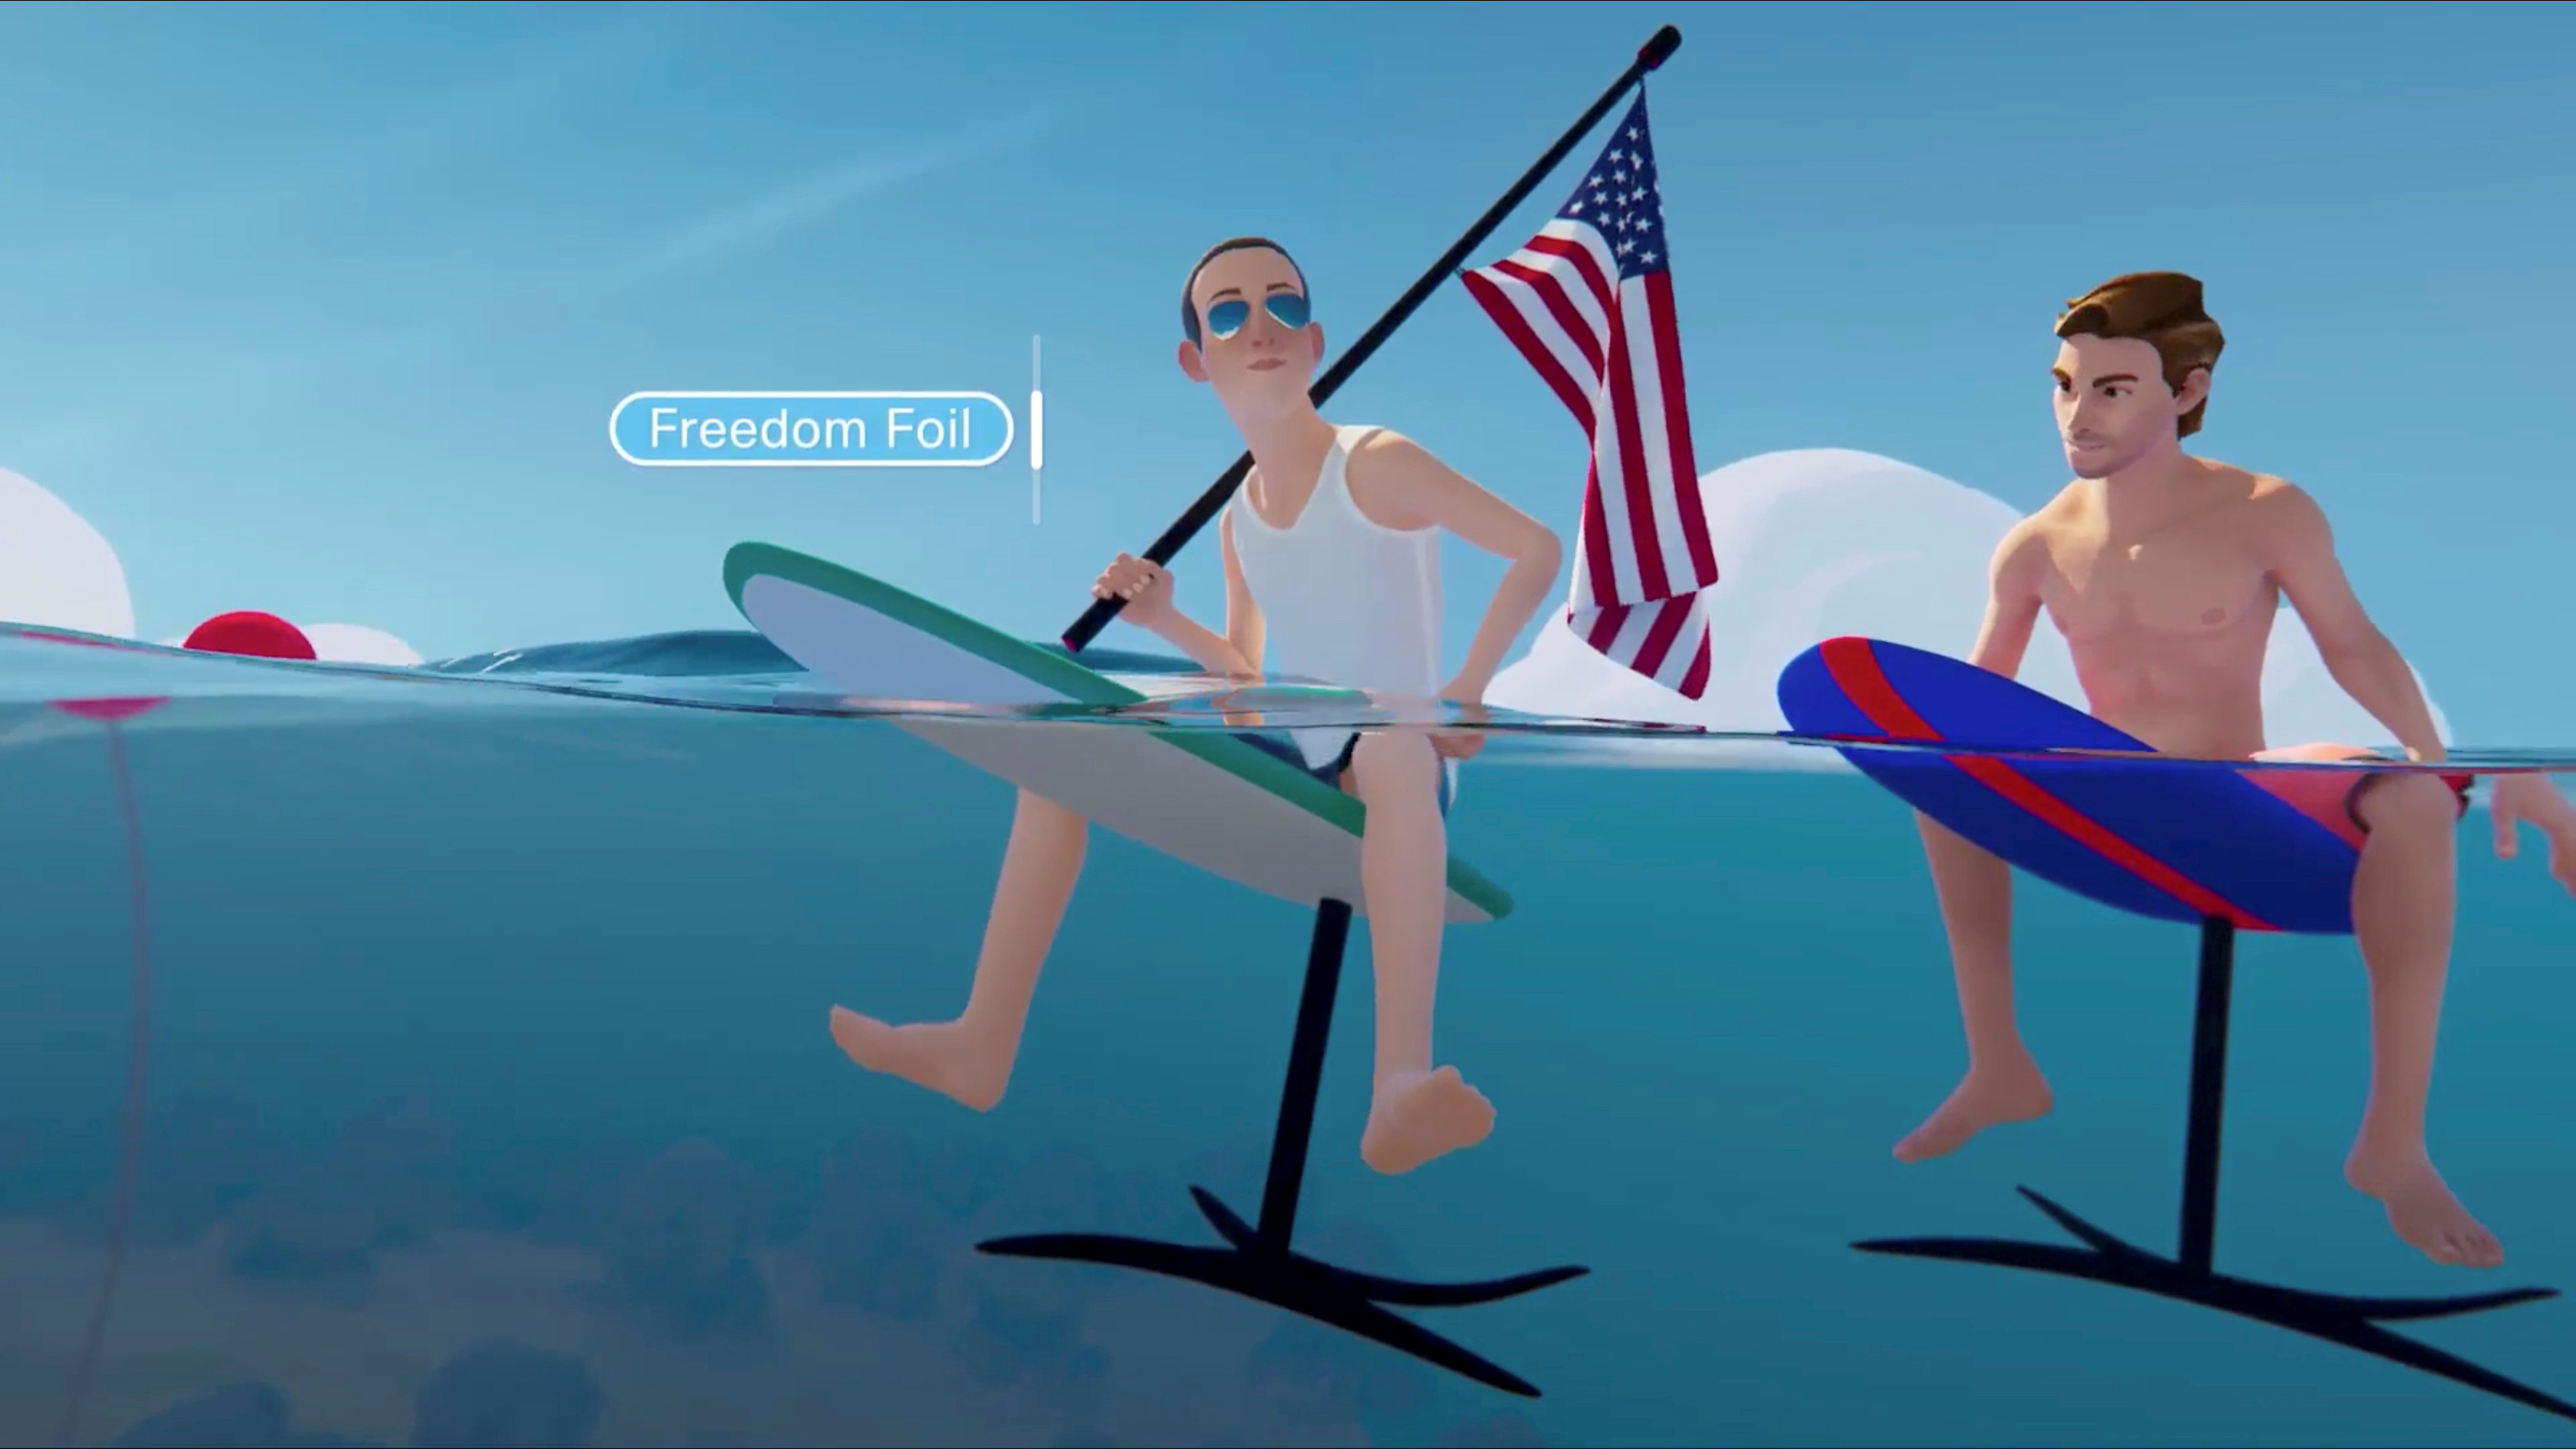 An avatar of Facebook CEO Mark Zuckerberg is seen carrying a U.S. flag while riding a hydrofoil in the 